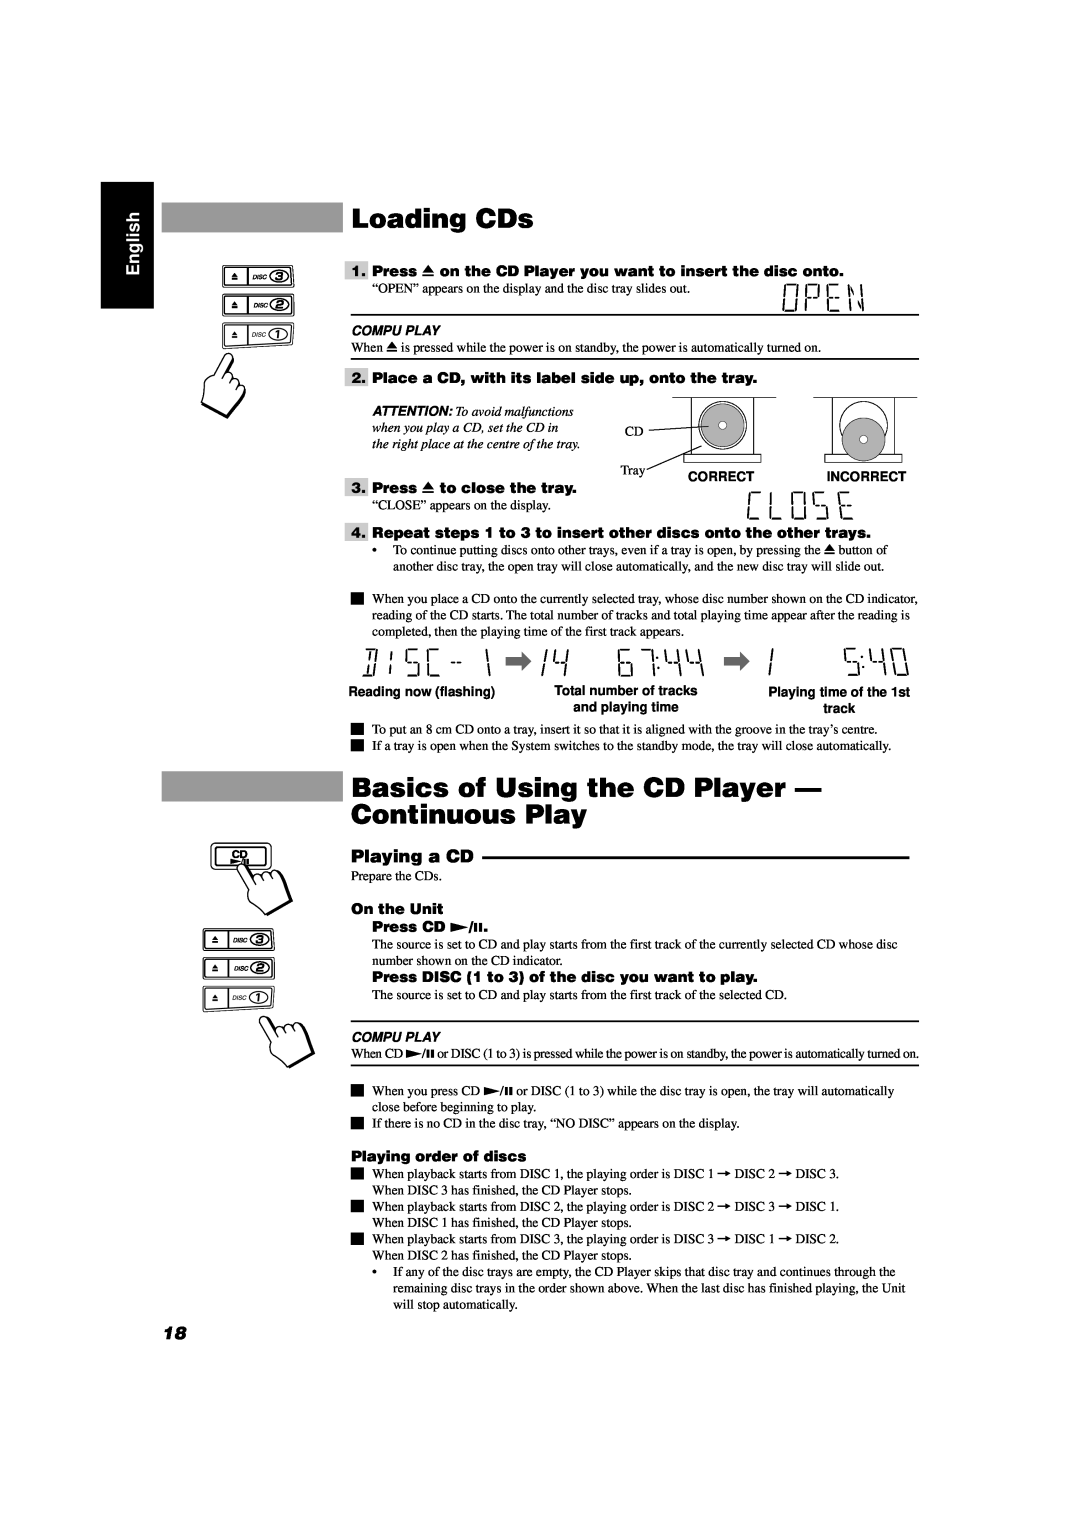 JVC CA-D432TR Loading CDs, Basics of Using the CD Player - Continuous Play, Playing a CD, English, Playing order of discs 